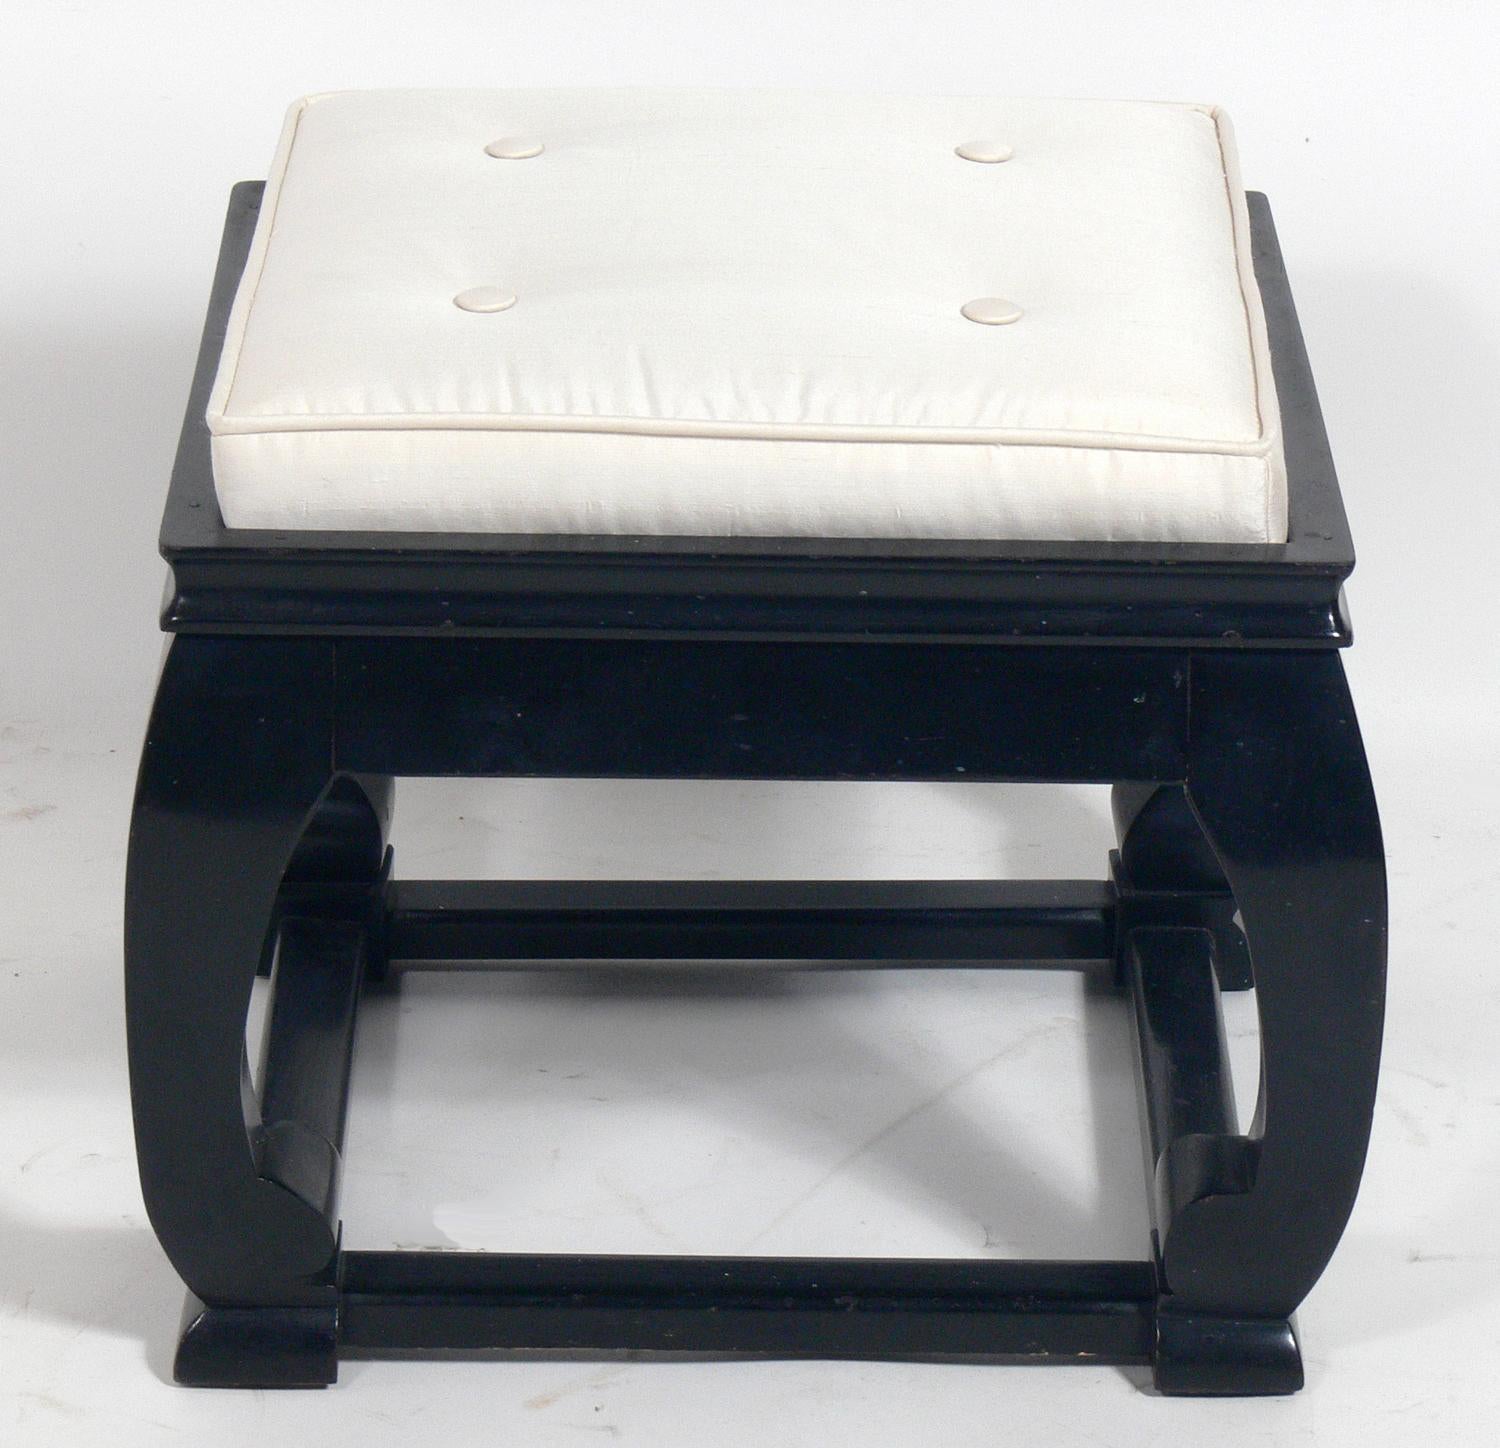 Black lacquer and silk chinoiserie stools, Asian, circa 1950s. They retain their original black lacquer finish and have been reupholstered in an ivory color silk upholstery.